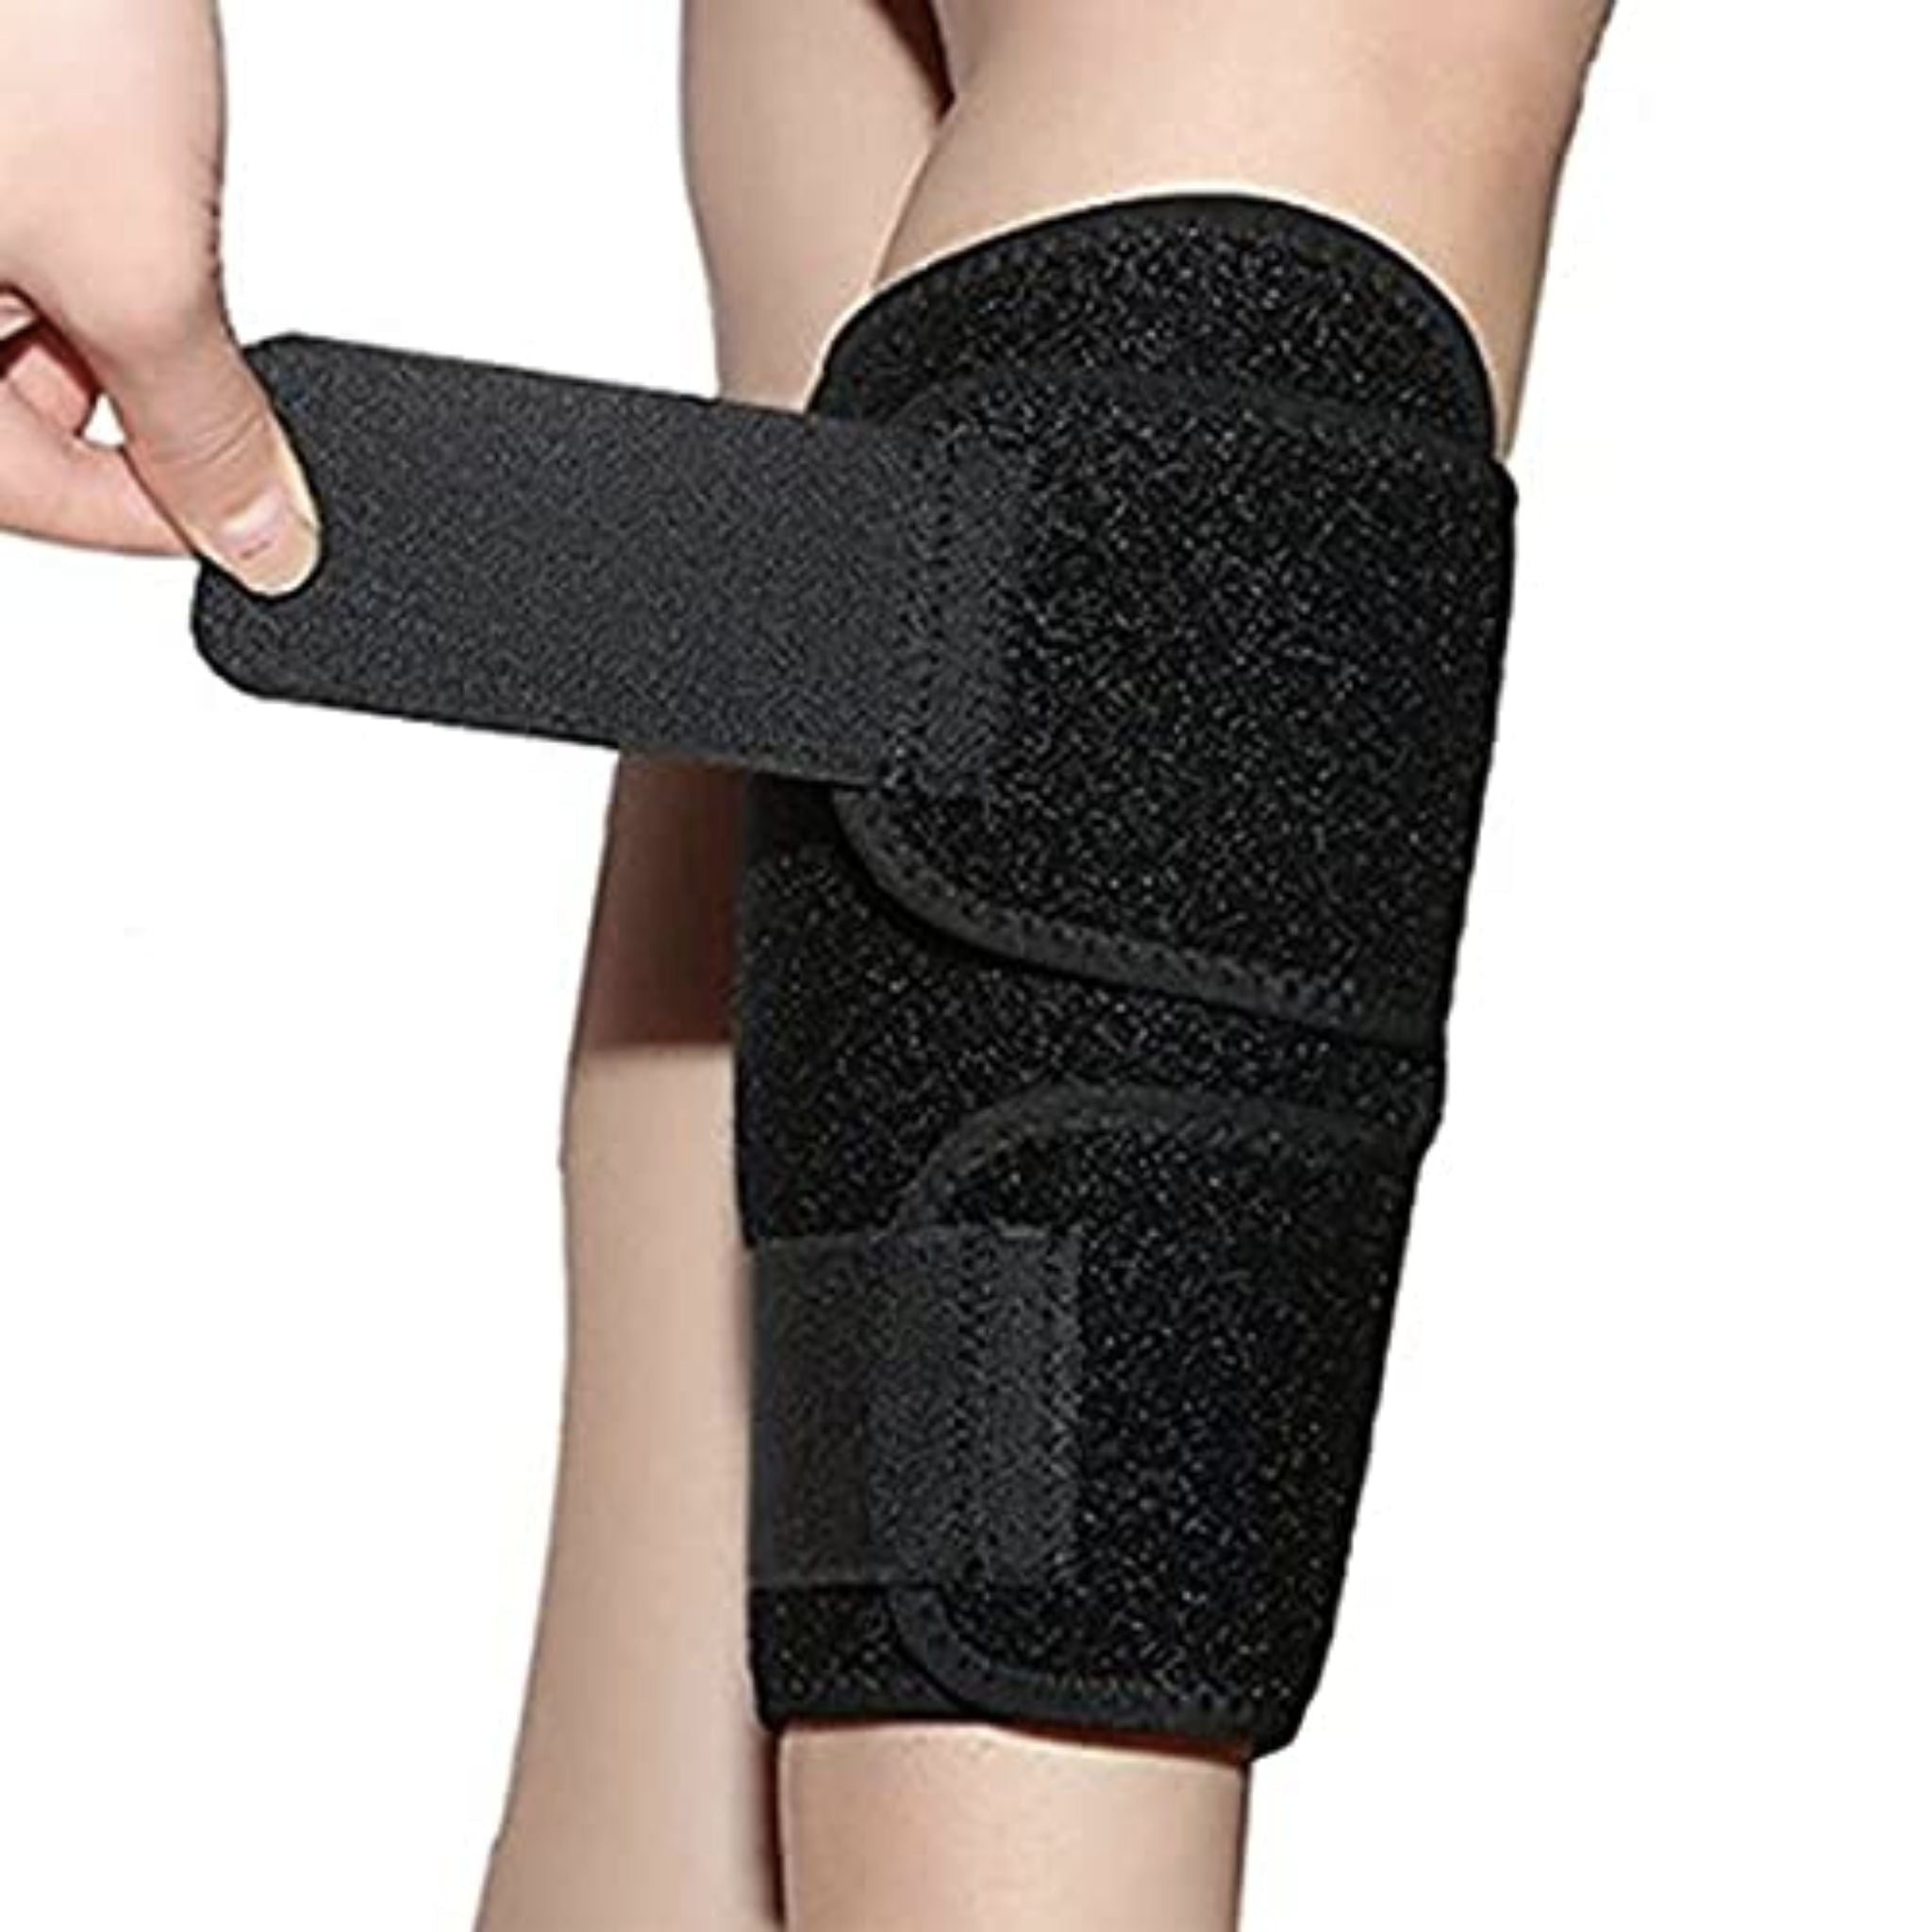 Calf Compression Sleeve Brace for Shin Splint and Muscle Support